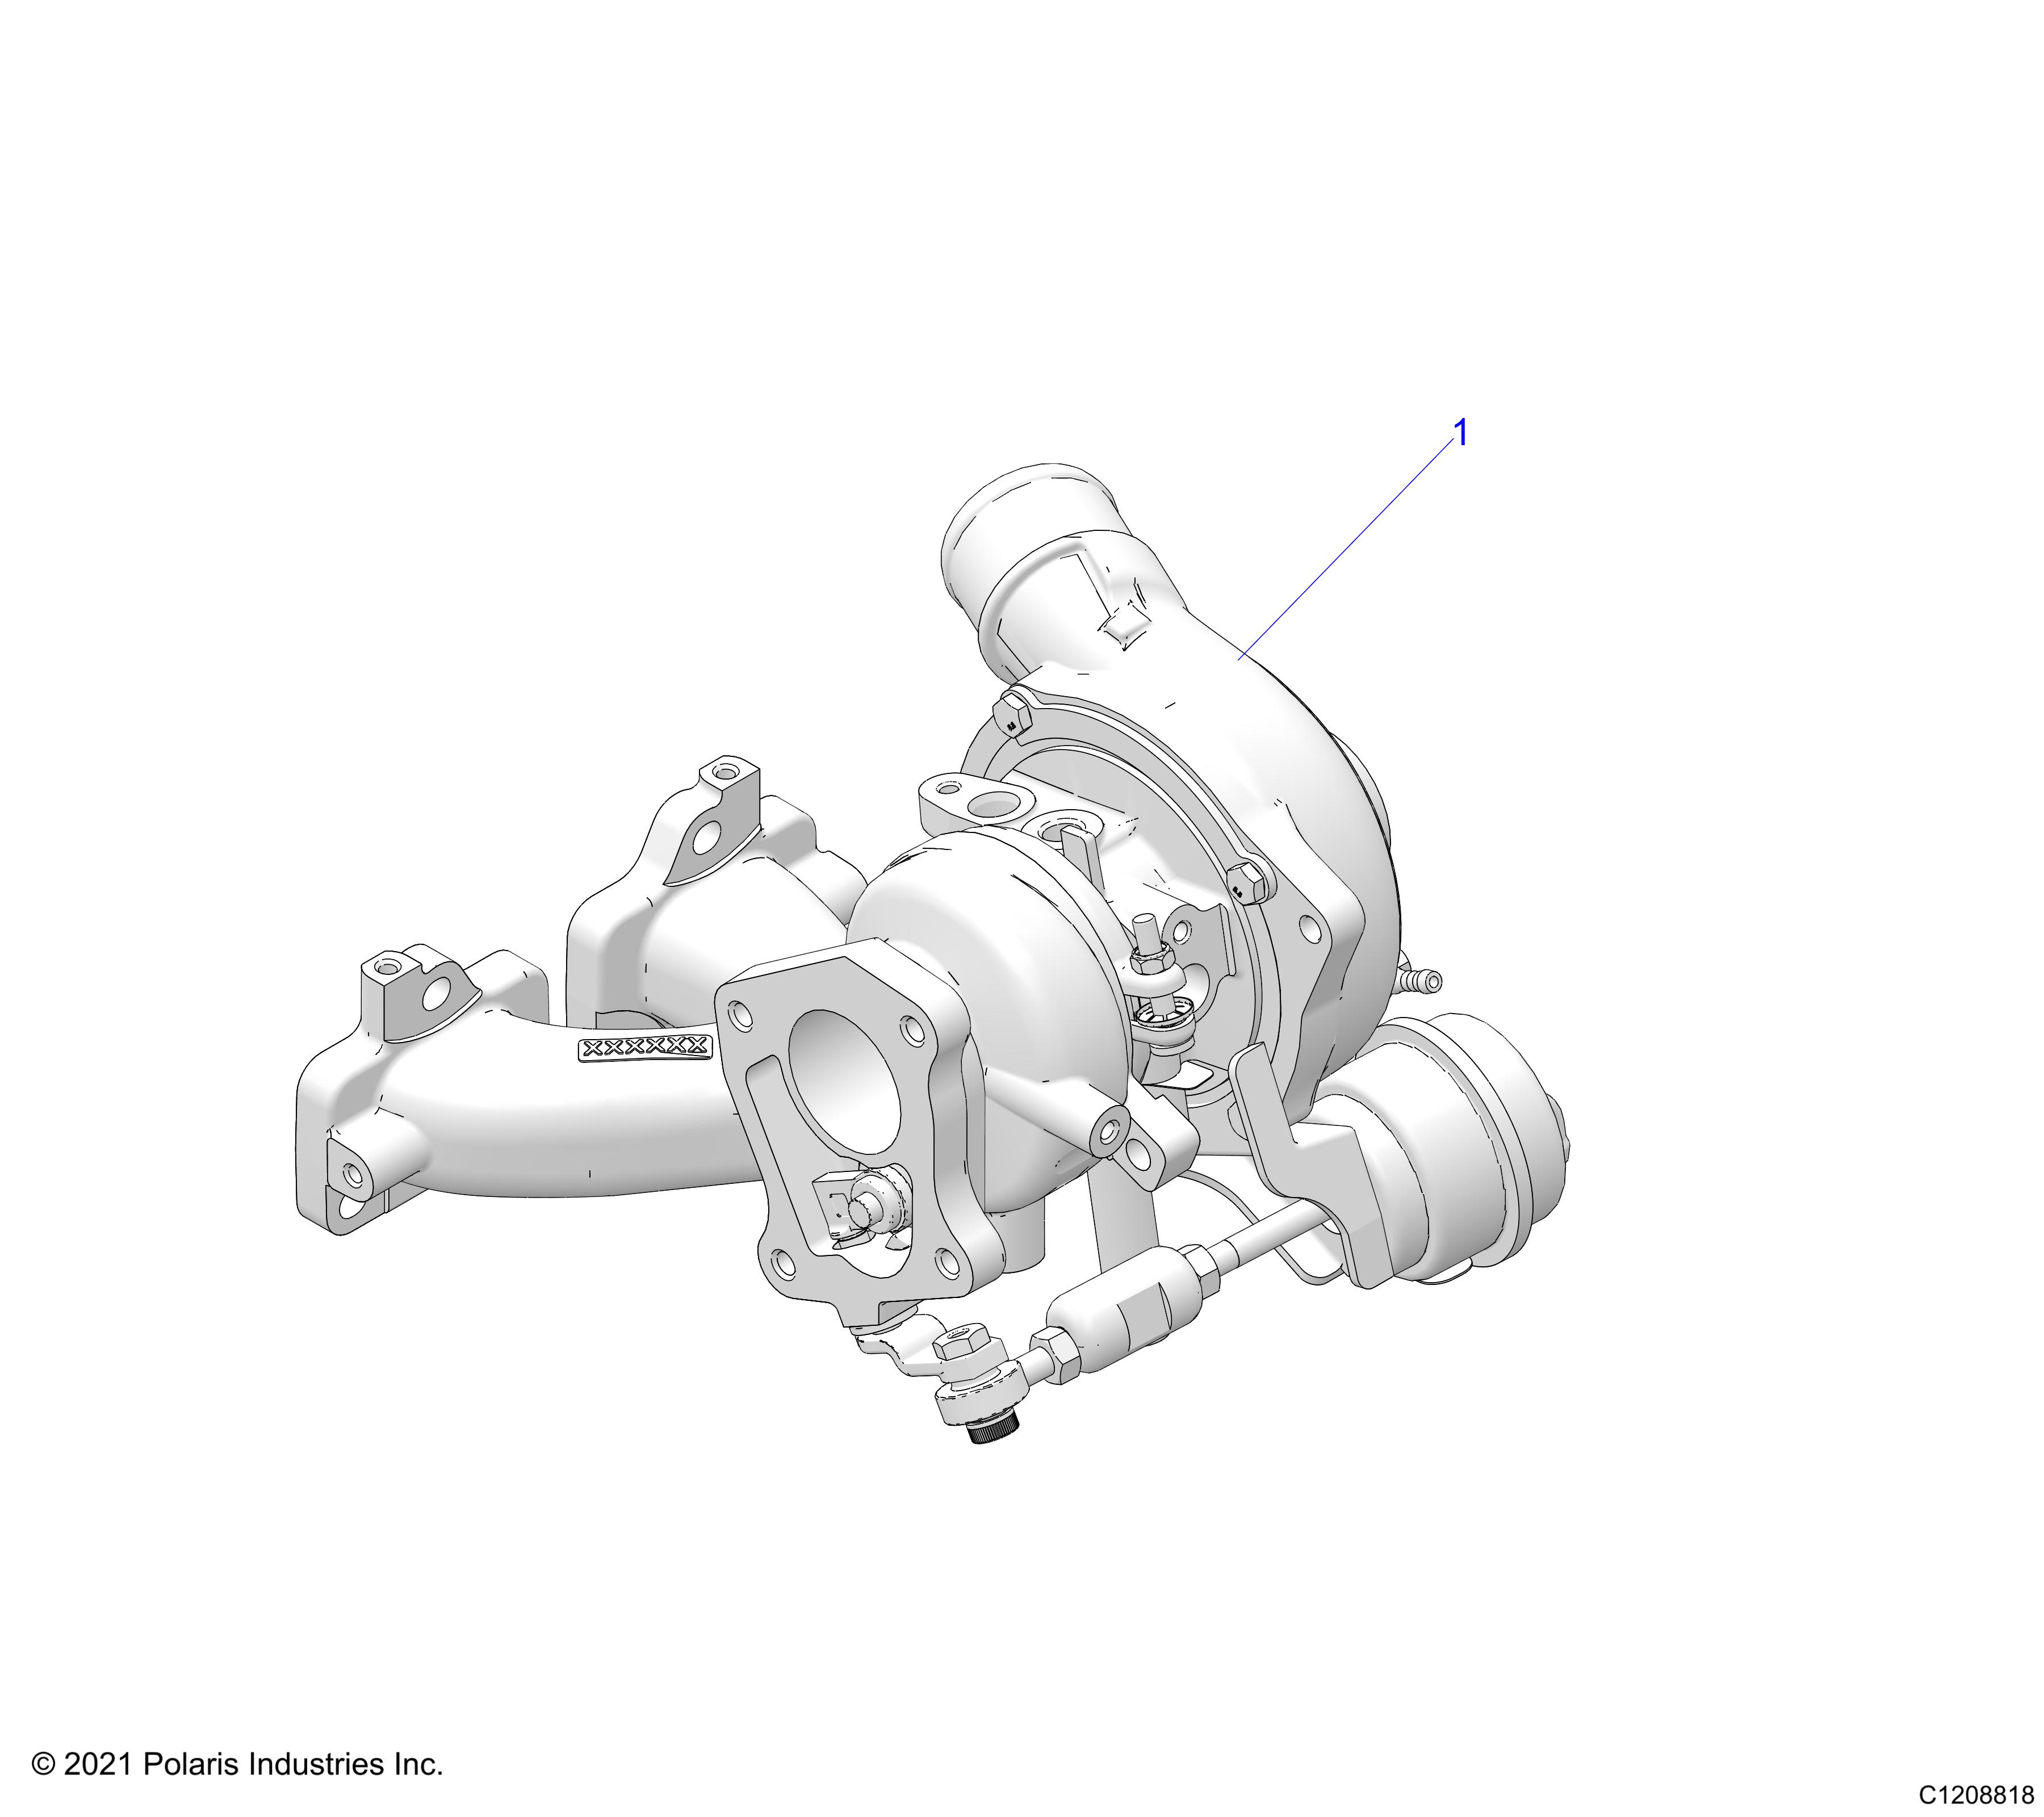 Part Number : 1208818 ASM-TURBO-R COMPLETE